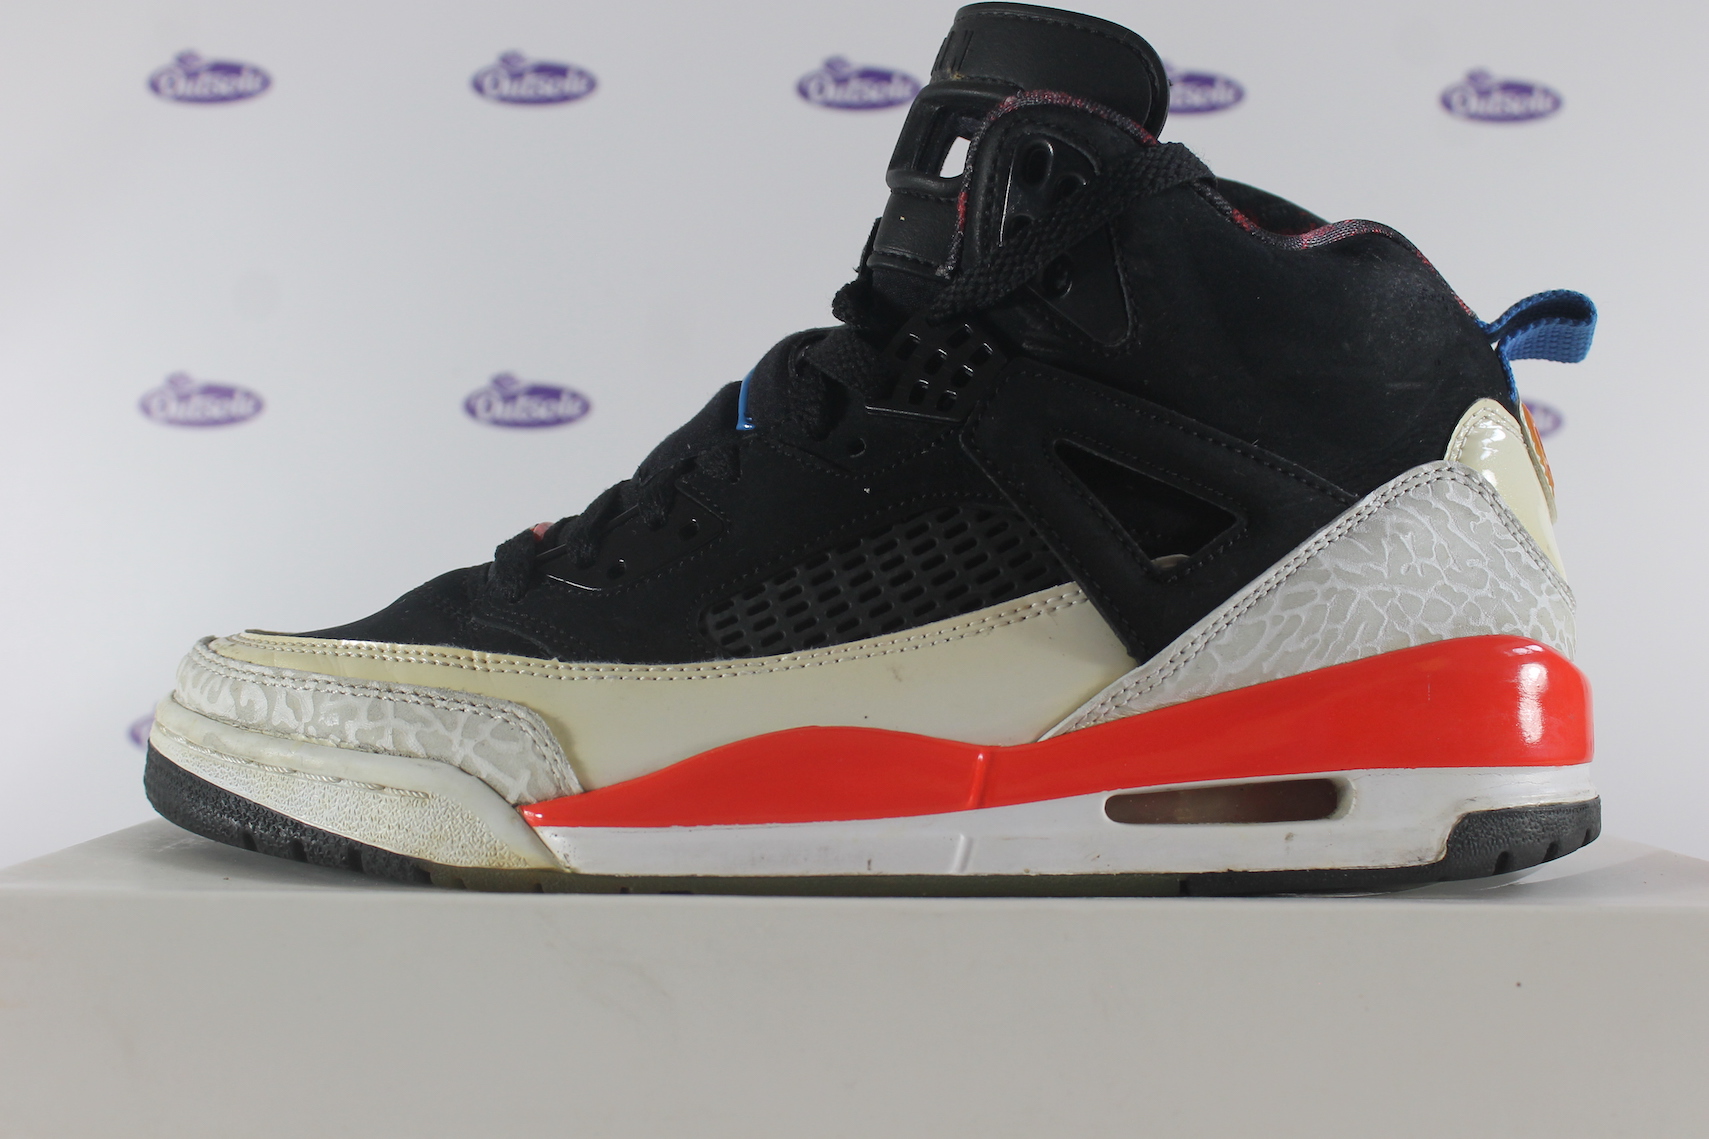 cache boss Burma Nike Air Jordan Spizike Infrared • ✓ In stock at Outsole